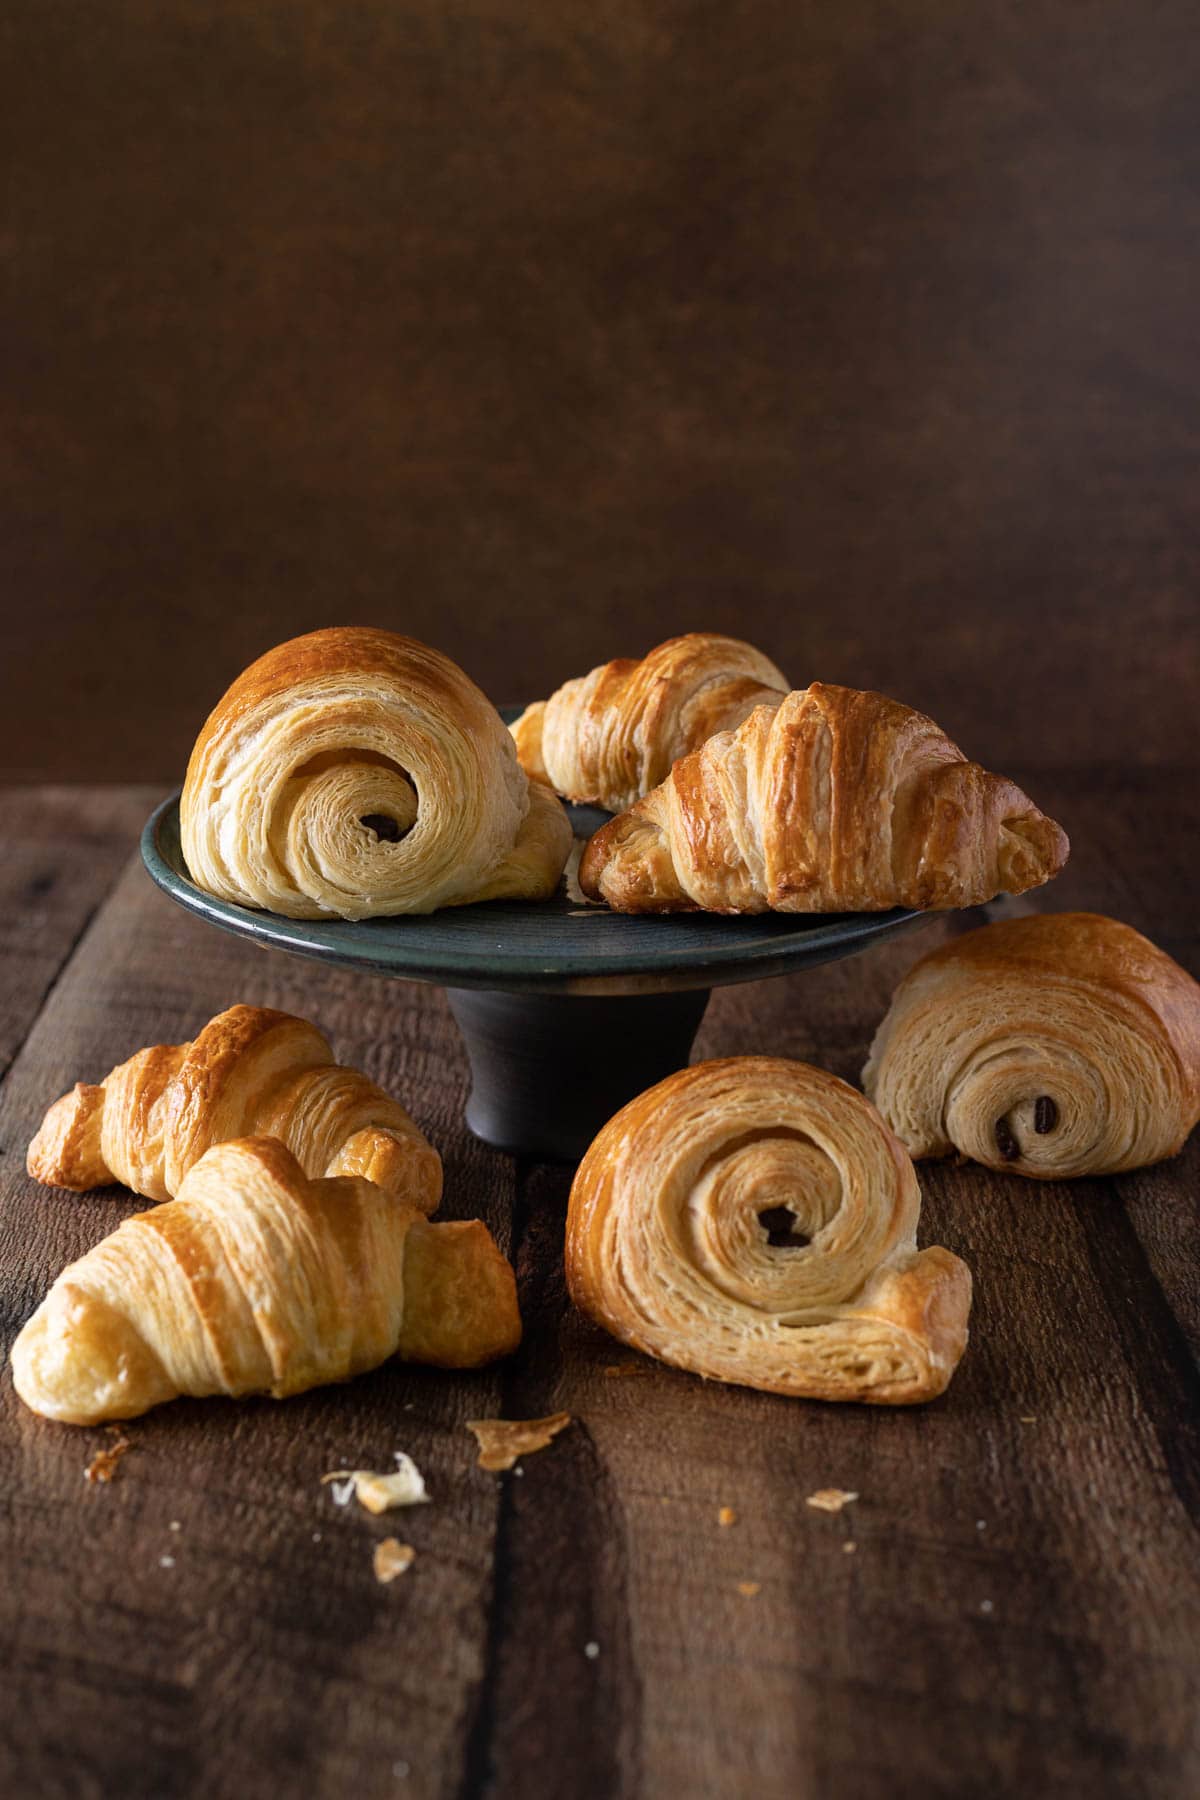 French croissants and chocolate croissants on a plate